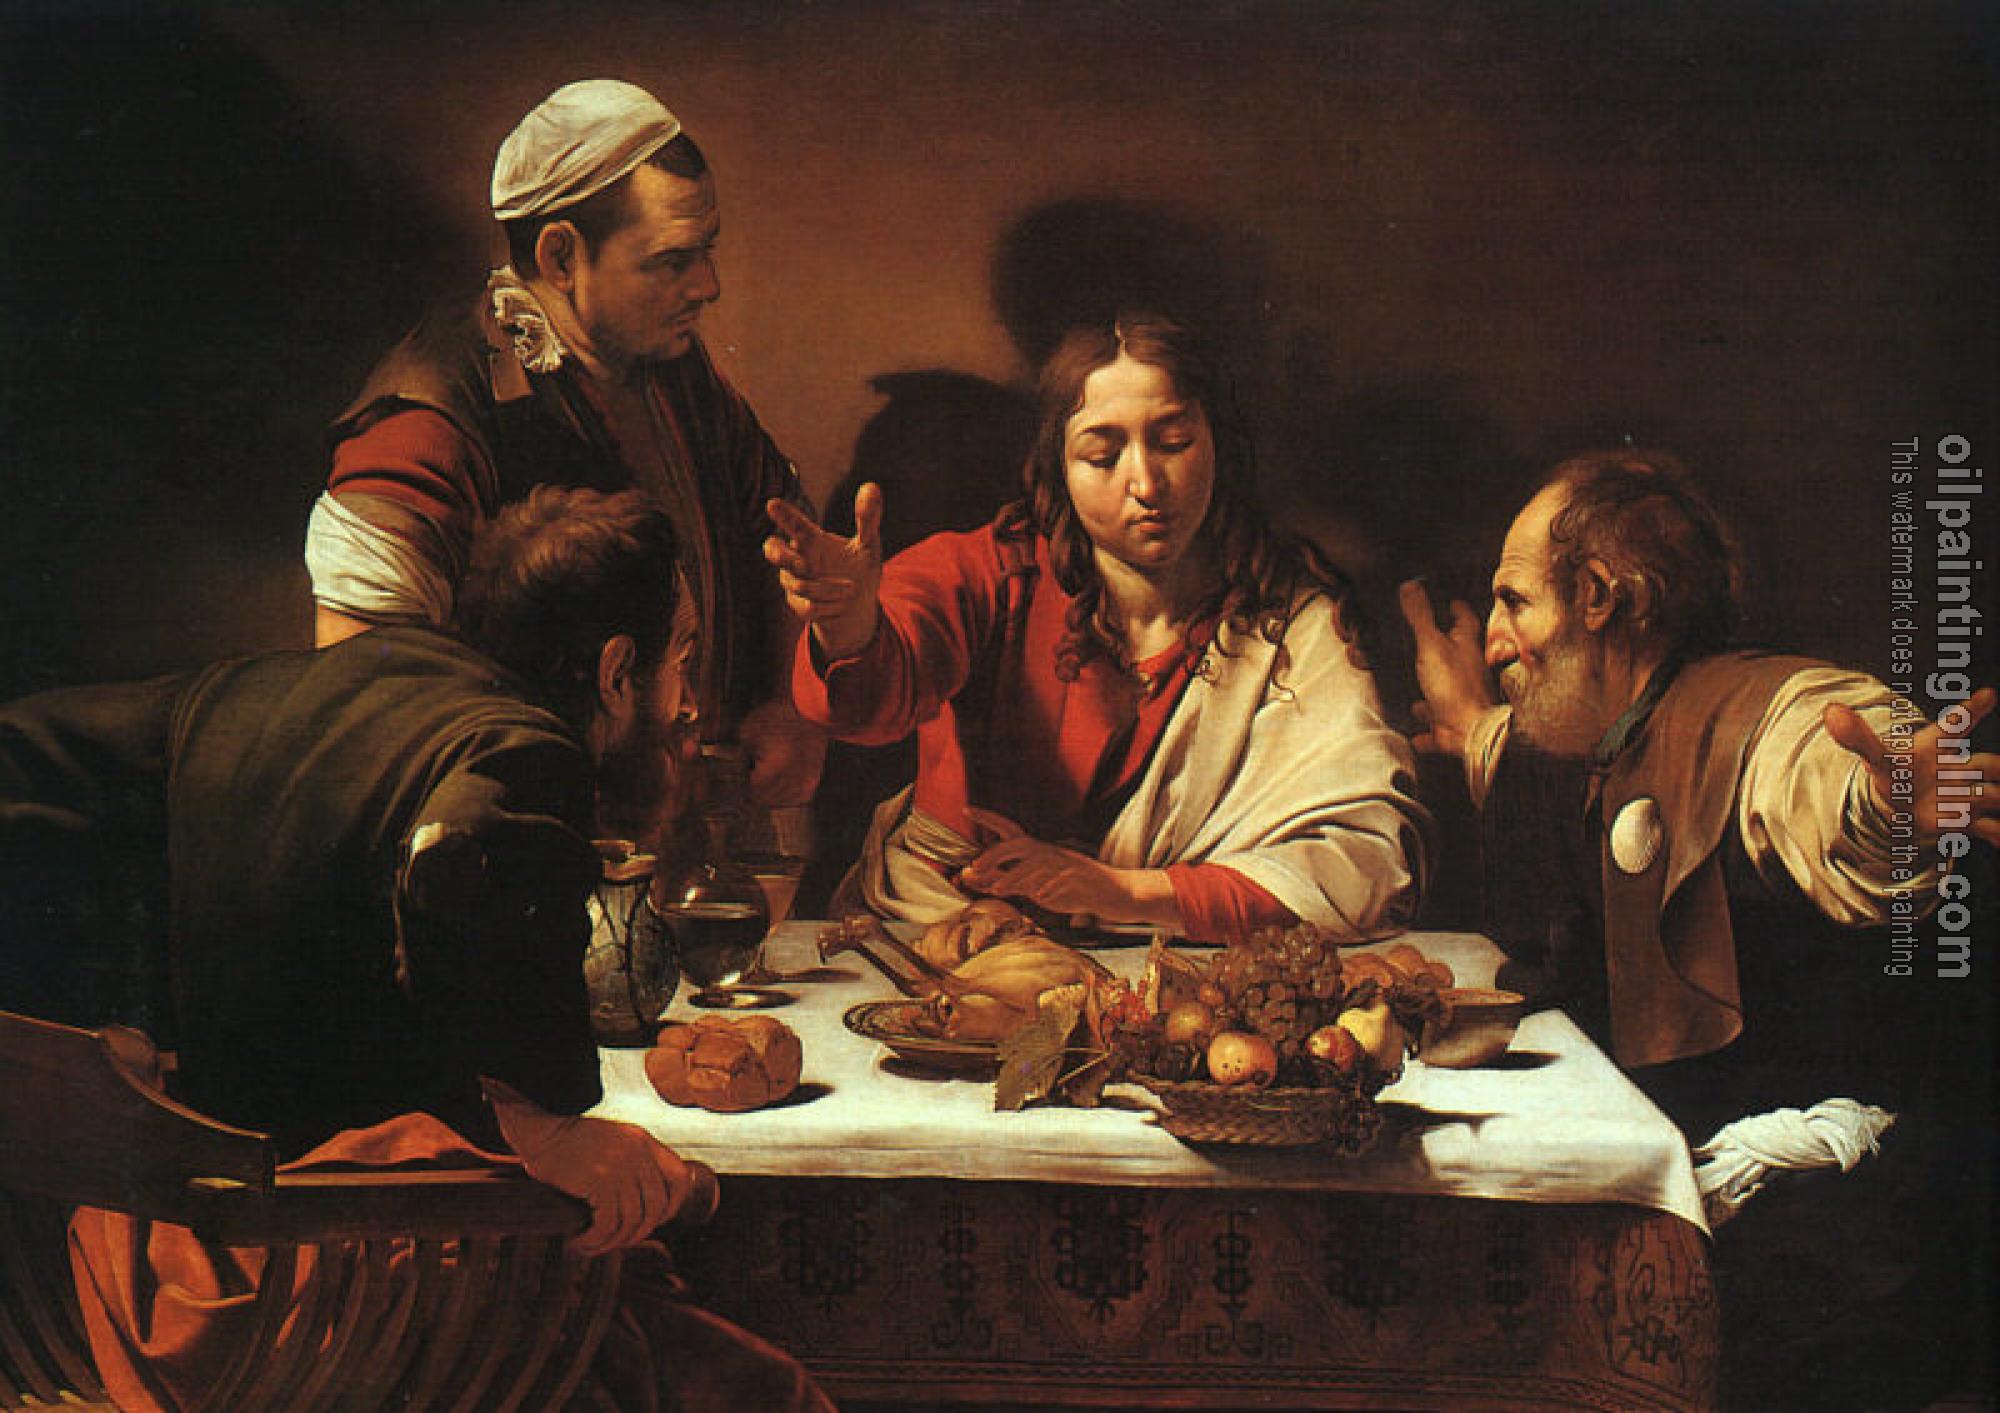 Caravaggio - The Supper at Emmaus